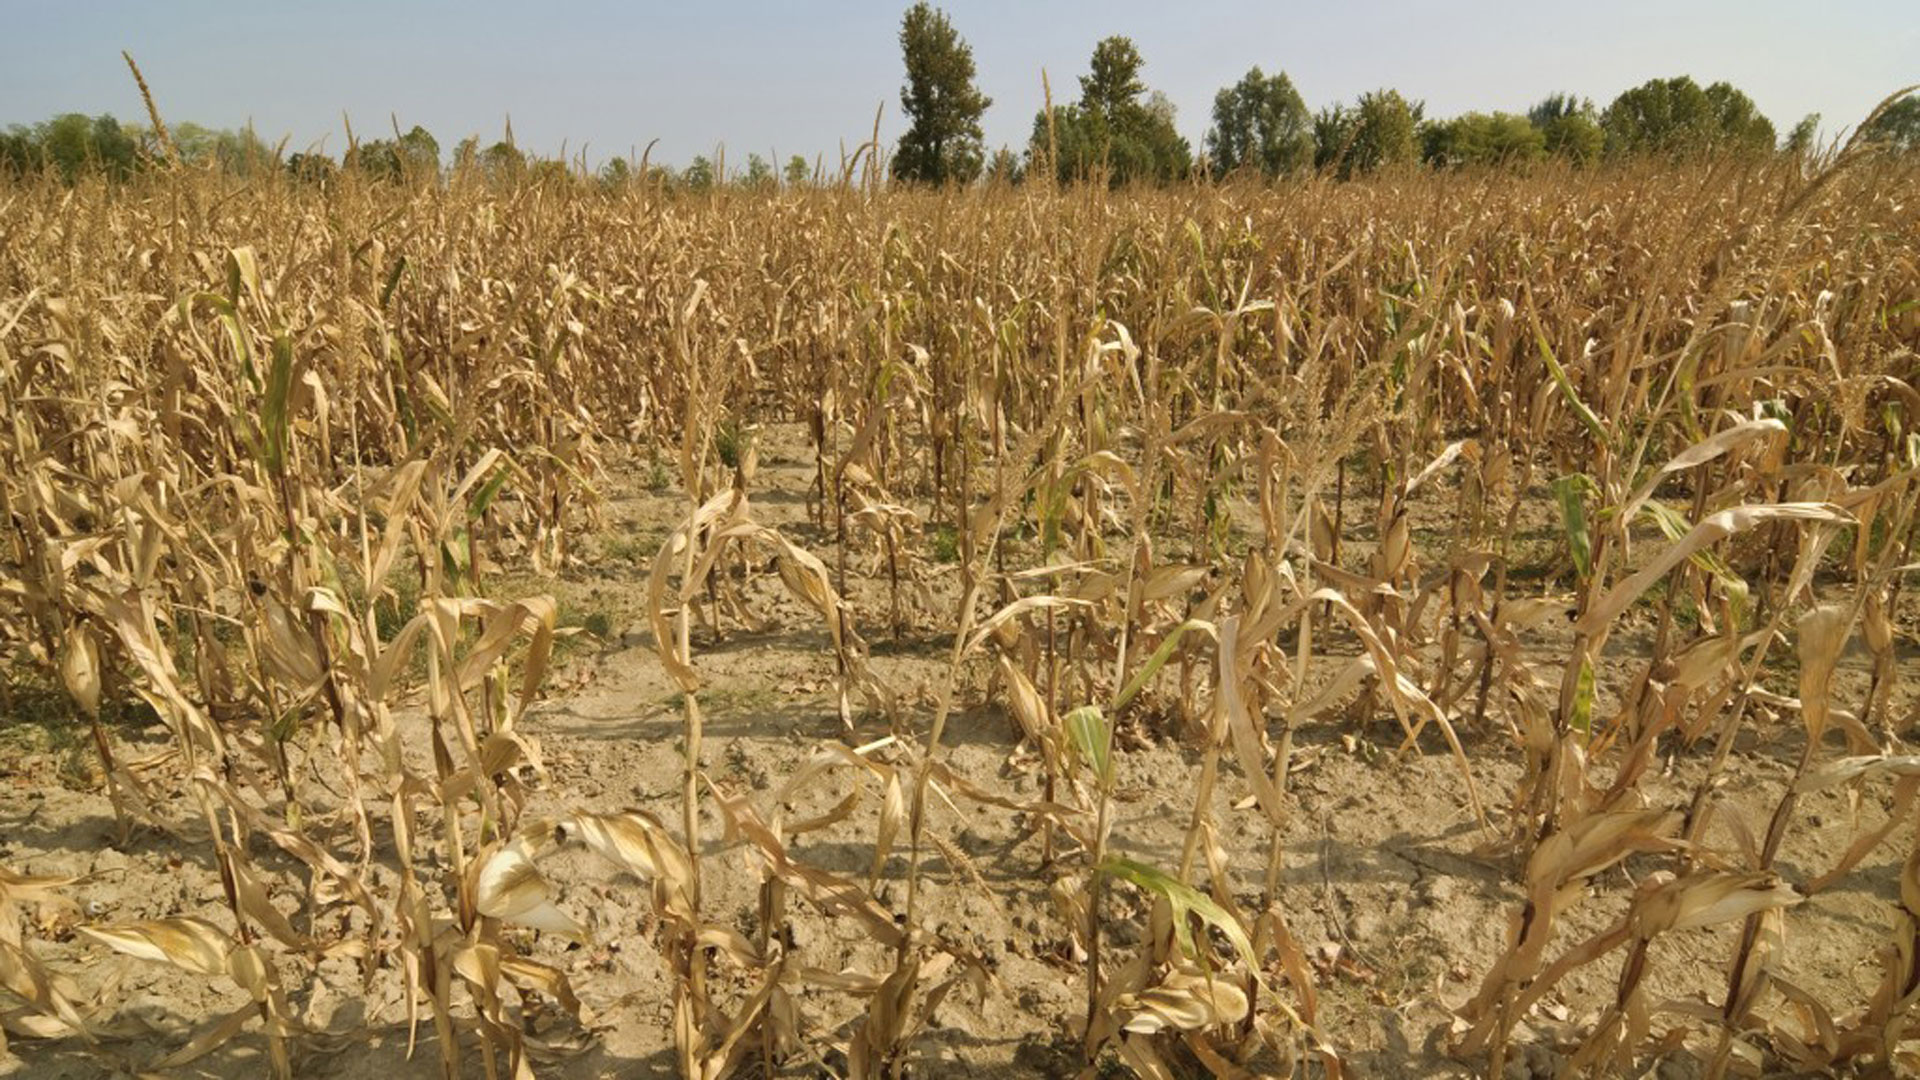 Crops still have weeks to grow and, with the La Niña-induced drought expected to last until March, crop forecasts may continue to fall, deepening the broader economic damage.